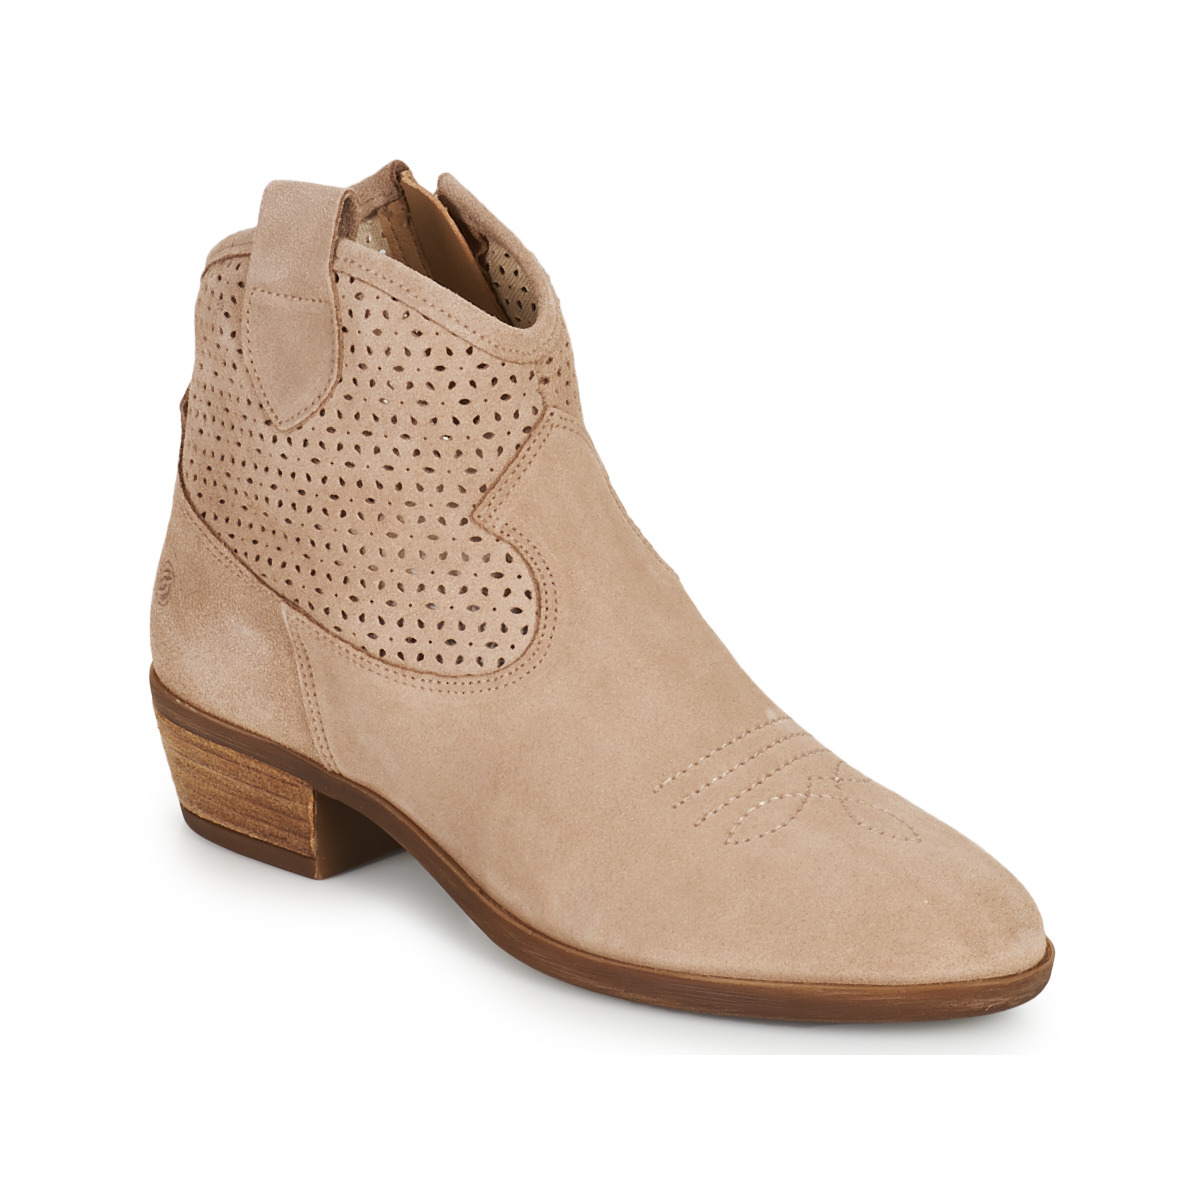 Lady Ankle Boots - Beige - Betty London - Spartoo GOOFASH